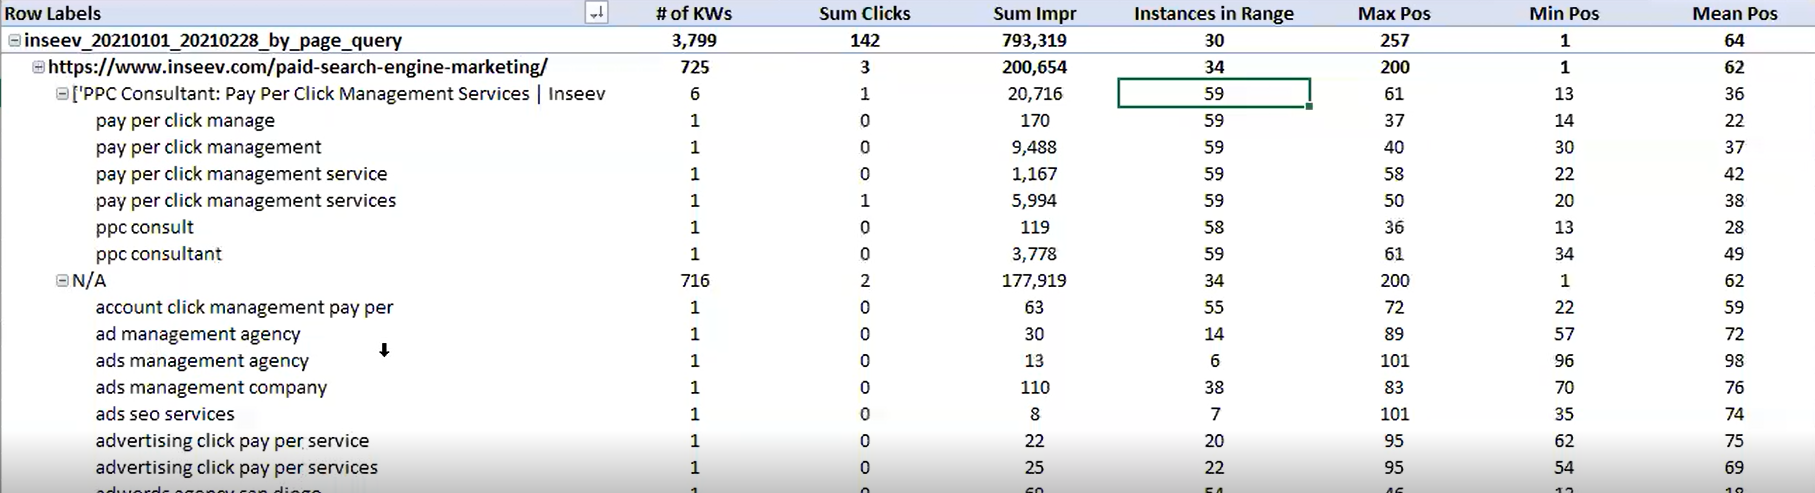 Example pivot table for traffic data.